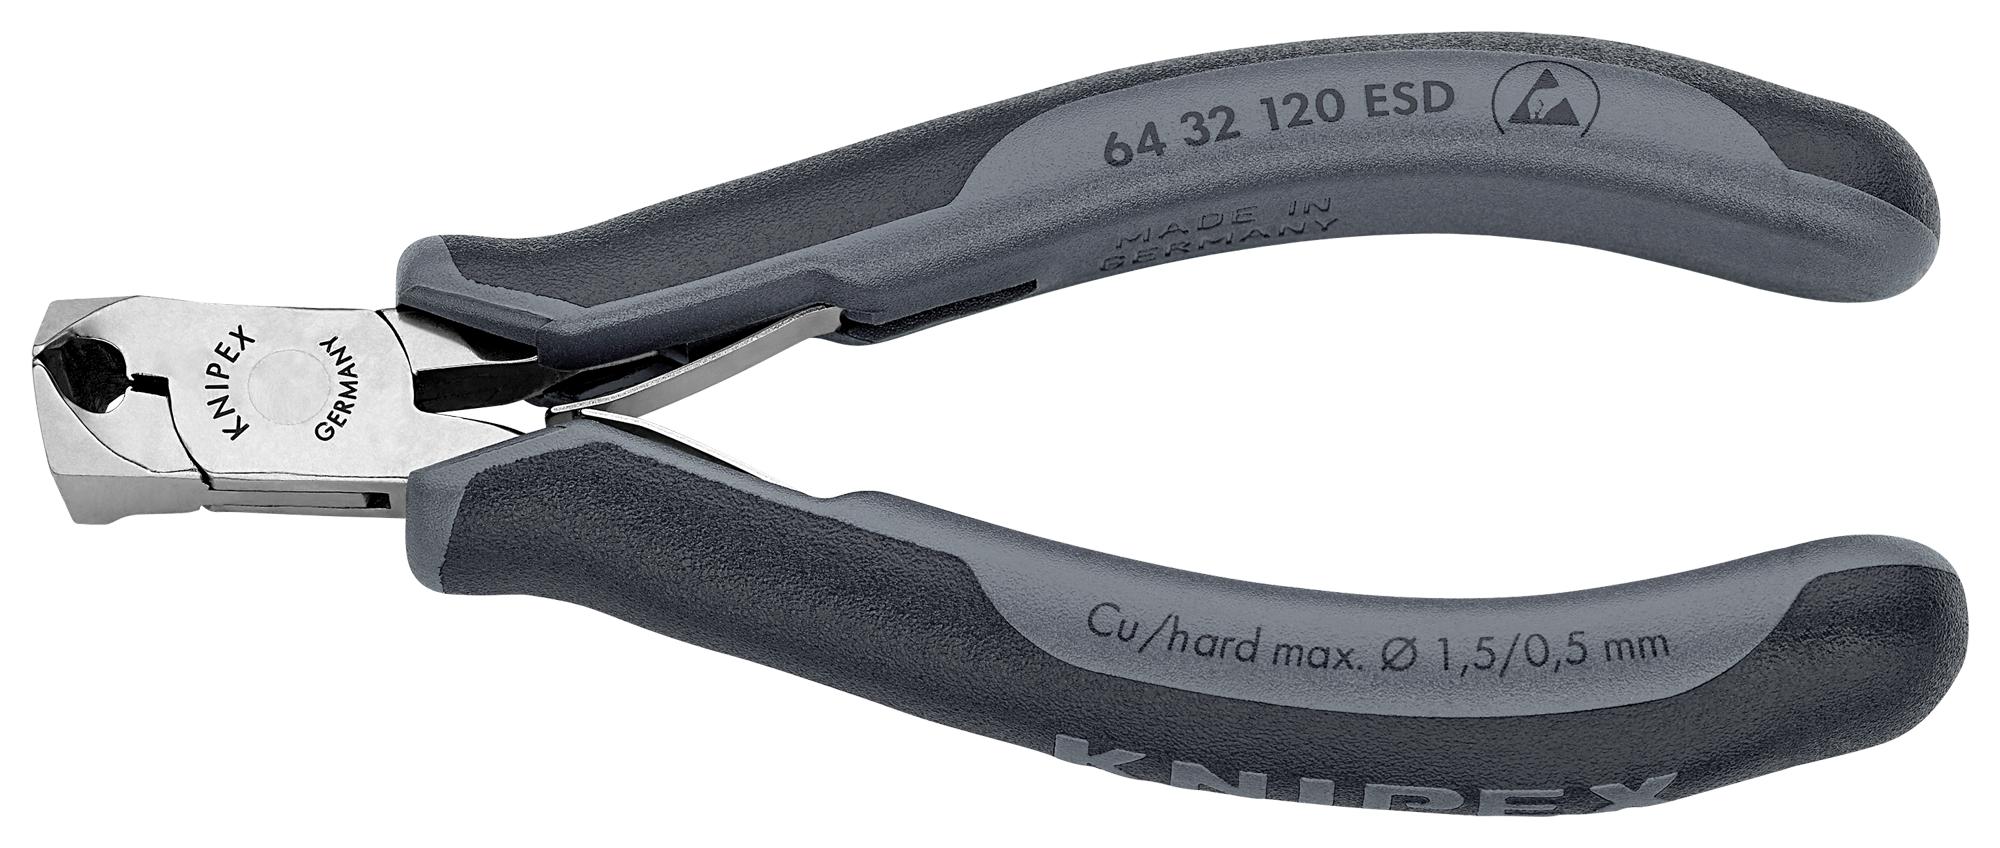 Knipex 64 32 120 Esd Oblique Cutting NIppers